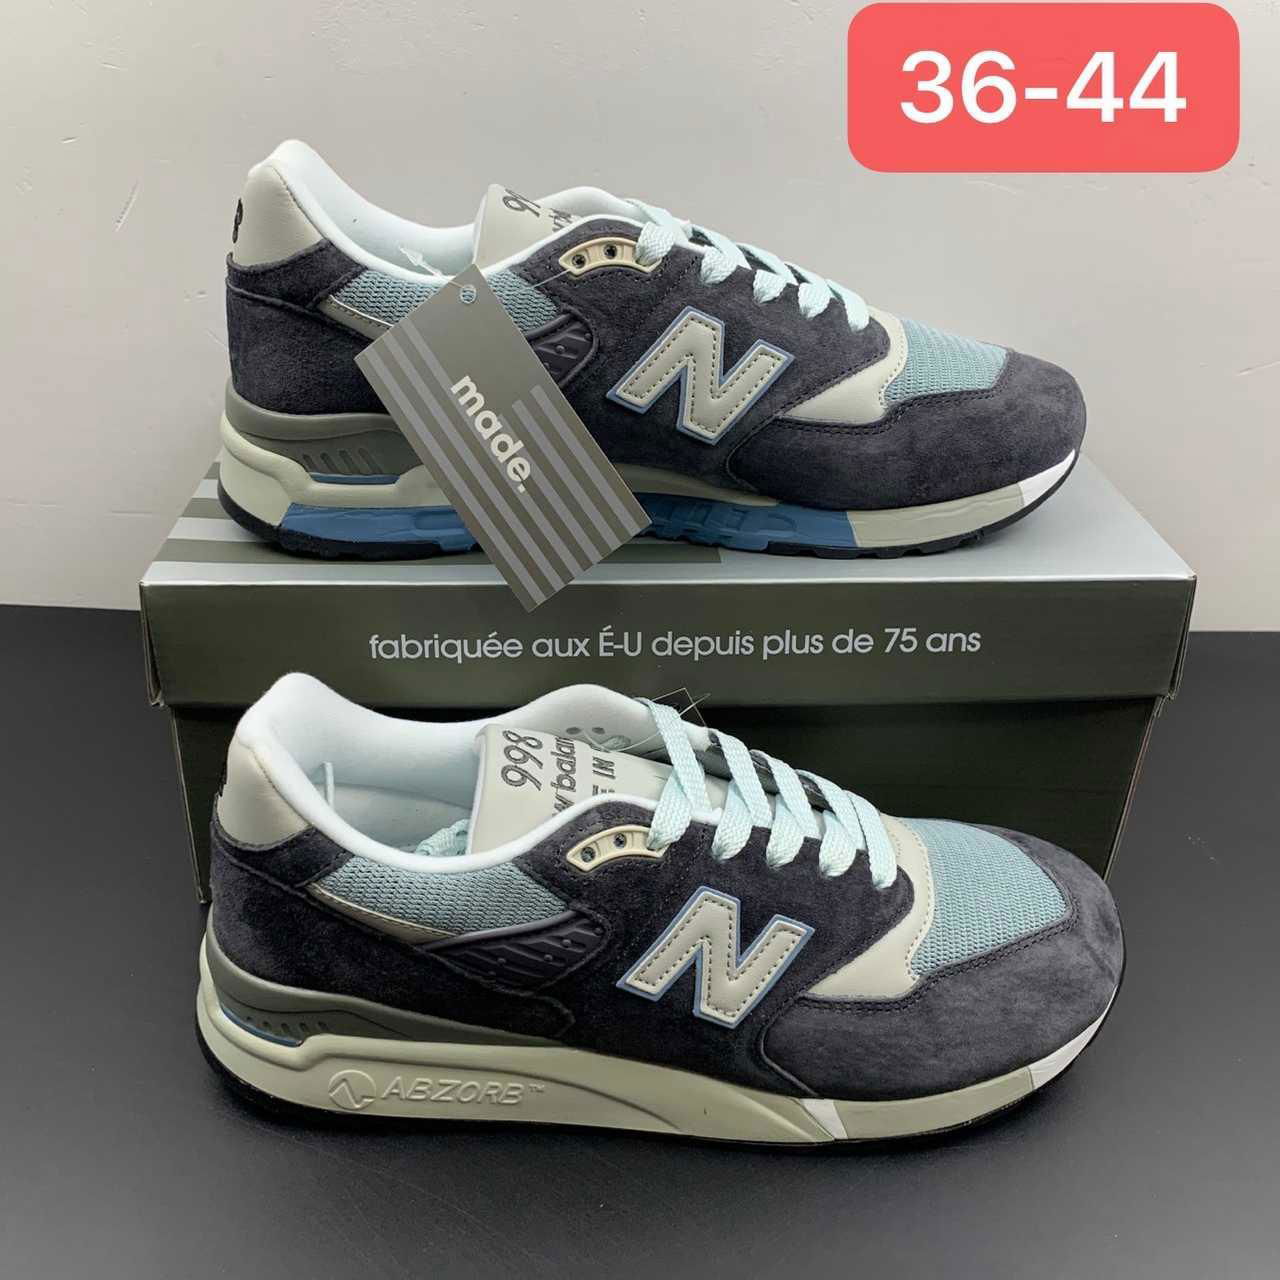 new NB shoes             NB998 Cushioning Breathable Running shoes 3